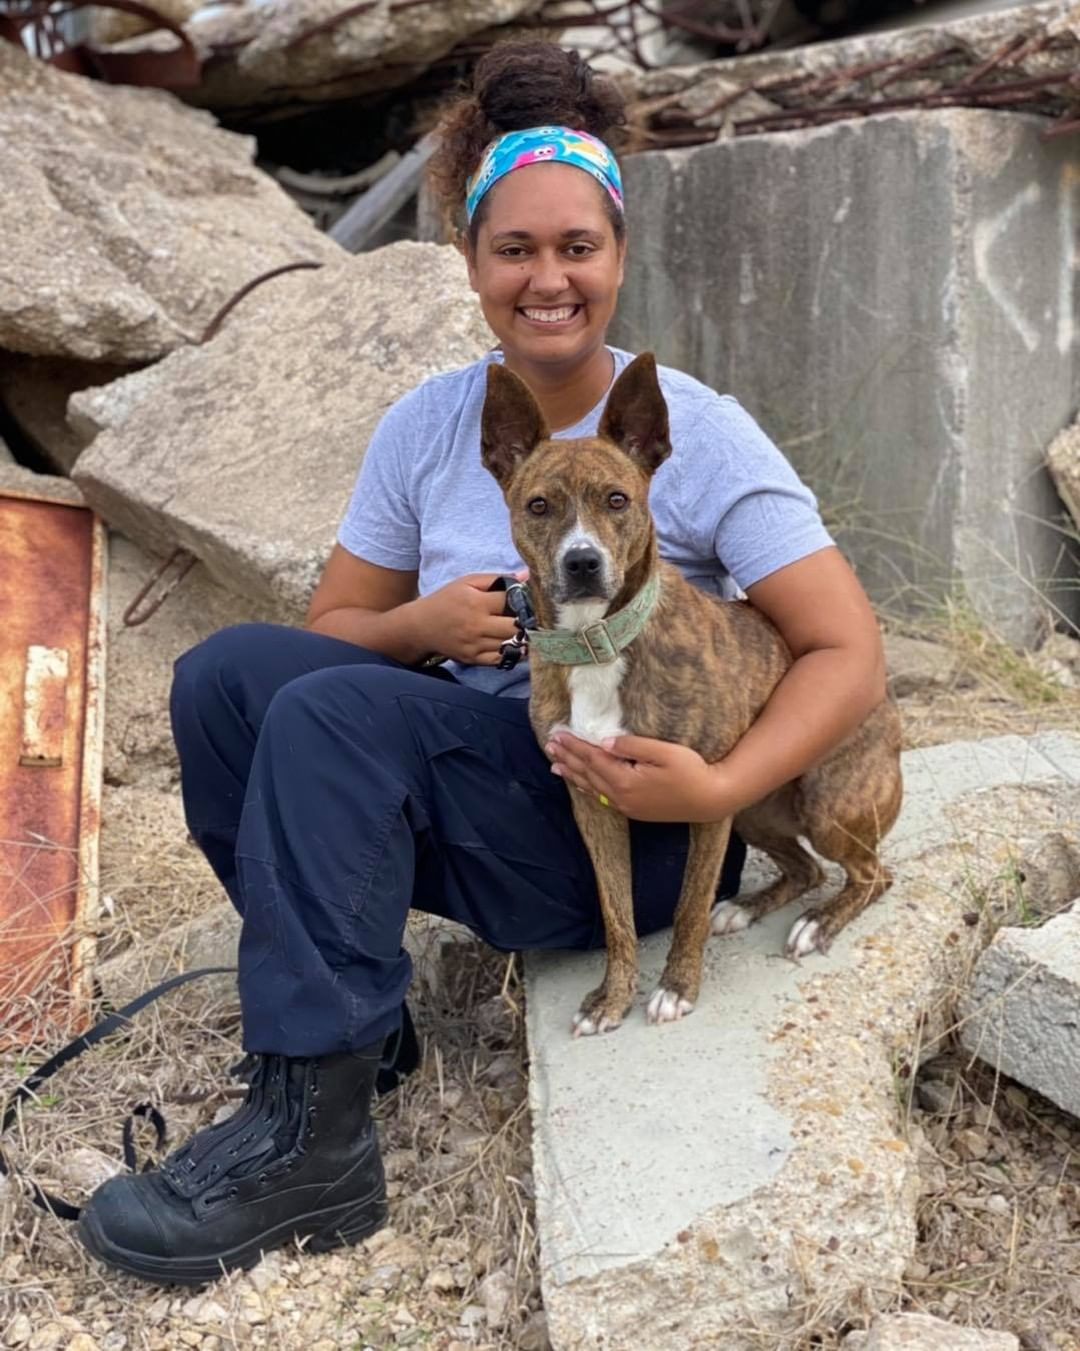 Two years ago today K9 Artimys joined us from @charmingpetrescue.  Today Arti and her handler Nyssa passed their FEMA Certification Evaluation - Human Remains.

Huge congratulations to this new team!

<a target='_blank' href='https://www.instagram.com/explore/tags/category5k9/'>#category5k9</a> <a target='_blank' href='https://www.instagram.com/explore/tags/fromsheltertosearch/'>#fromsheltertosearch</a> <a target='_blank' href='https://www.instagram.com/explore/tags/disastersearch/'>#disastersearch</a>